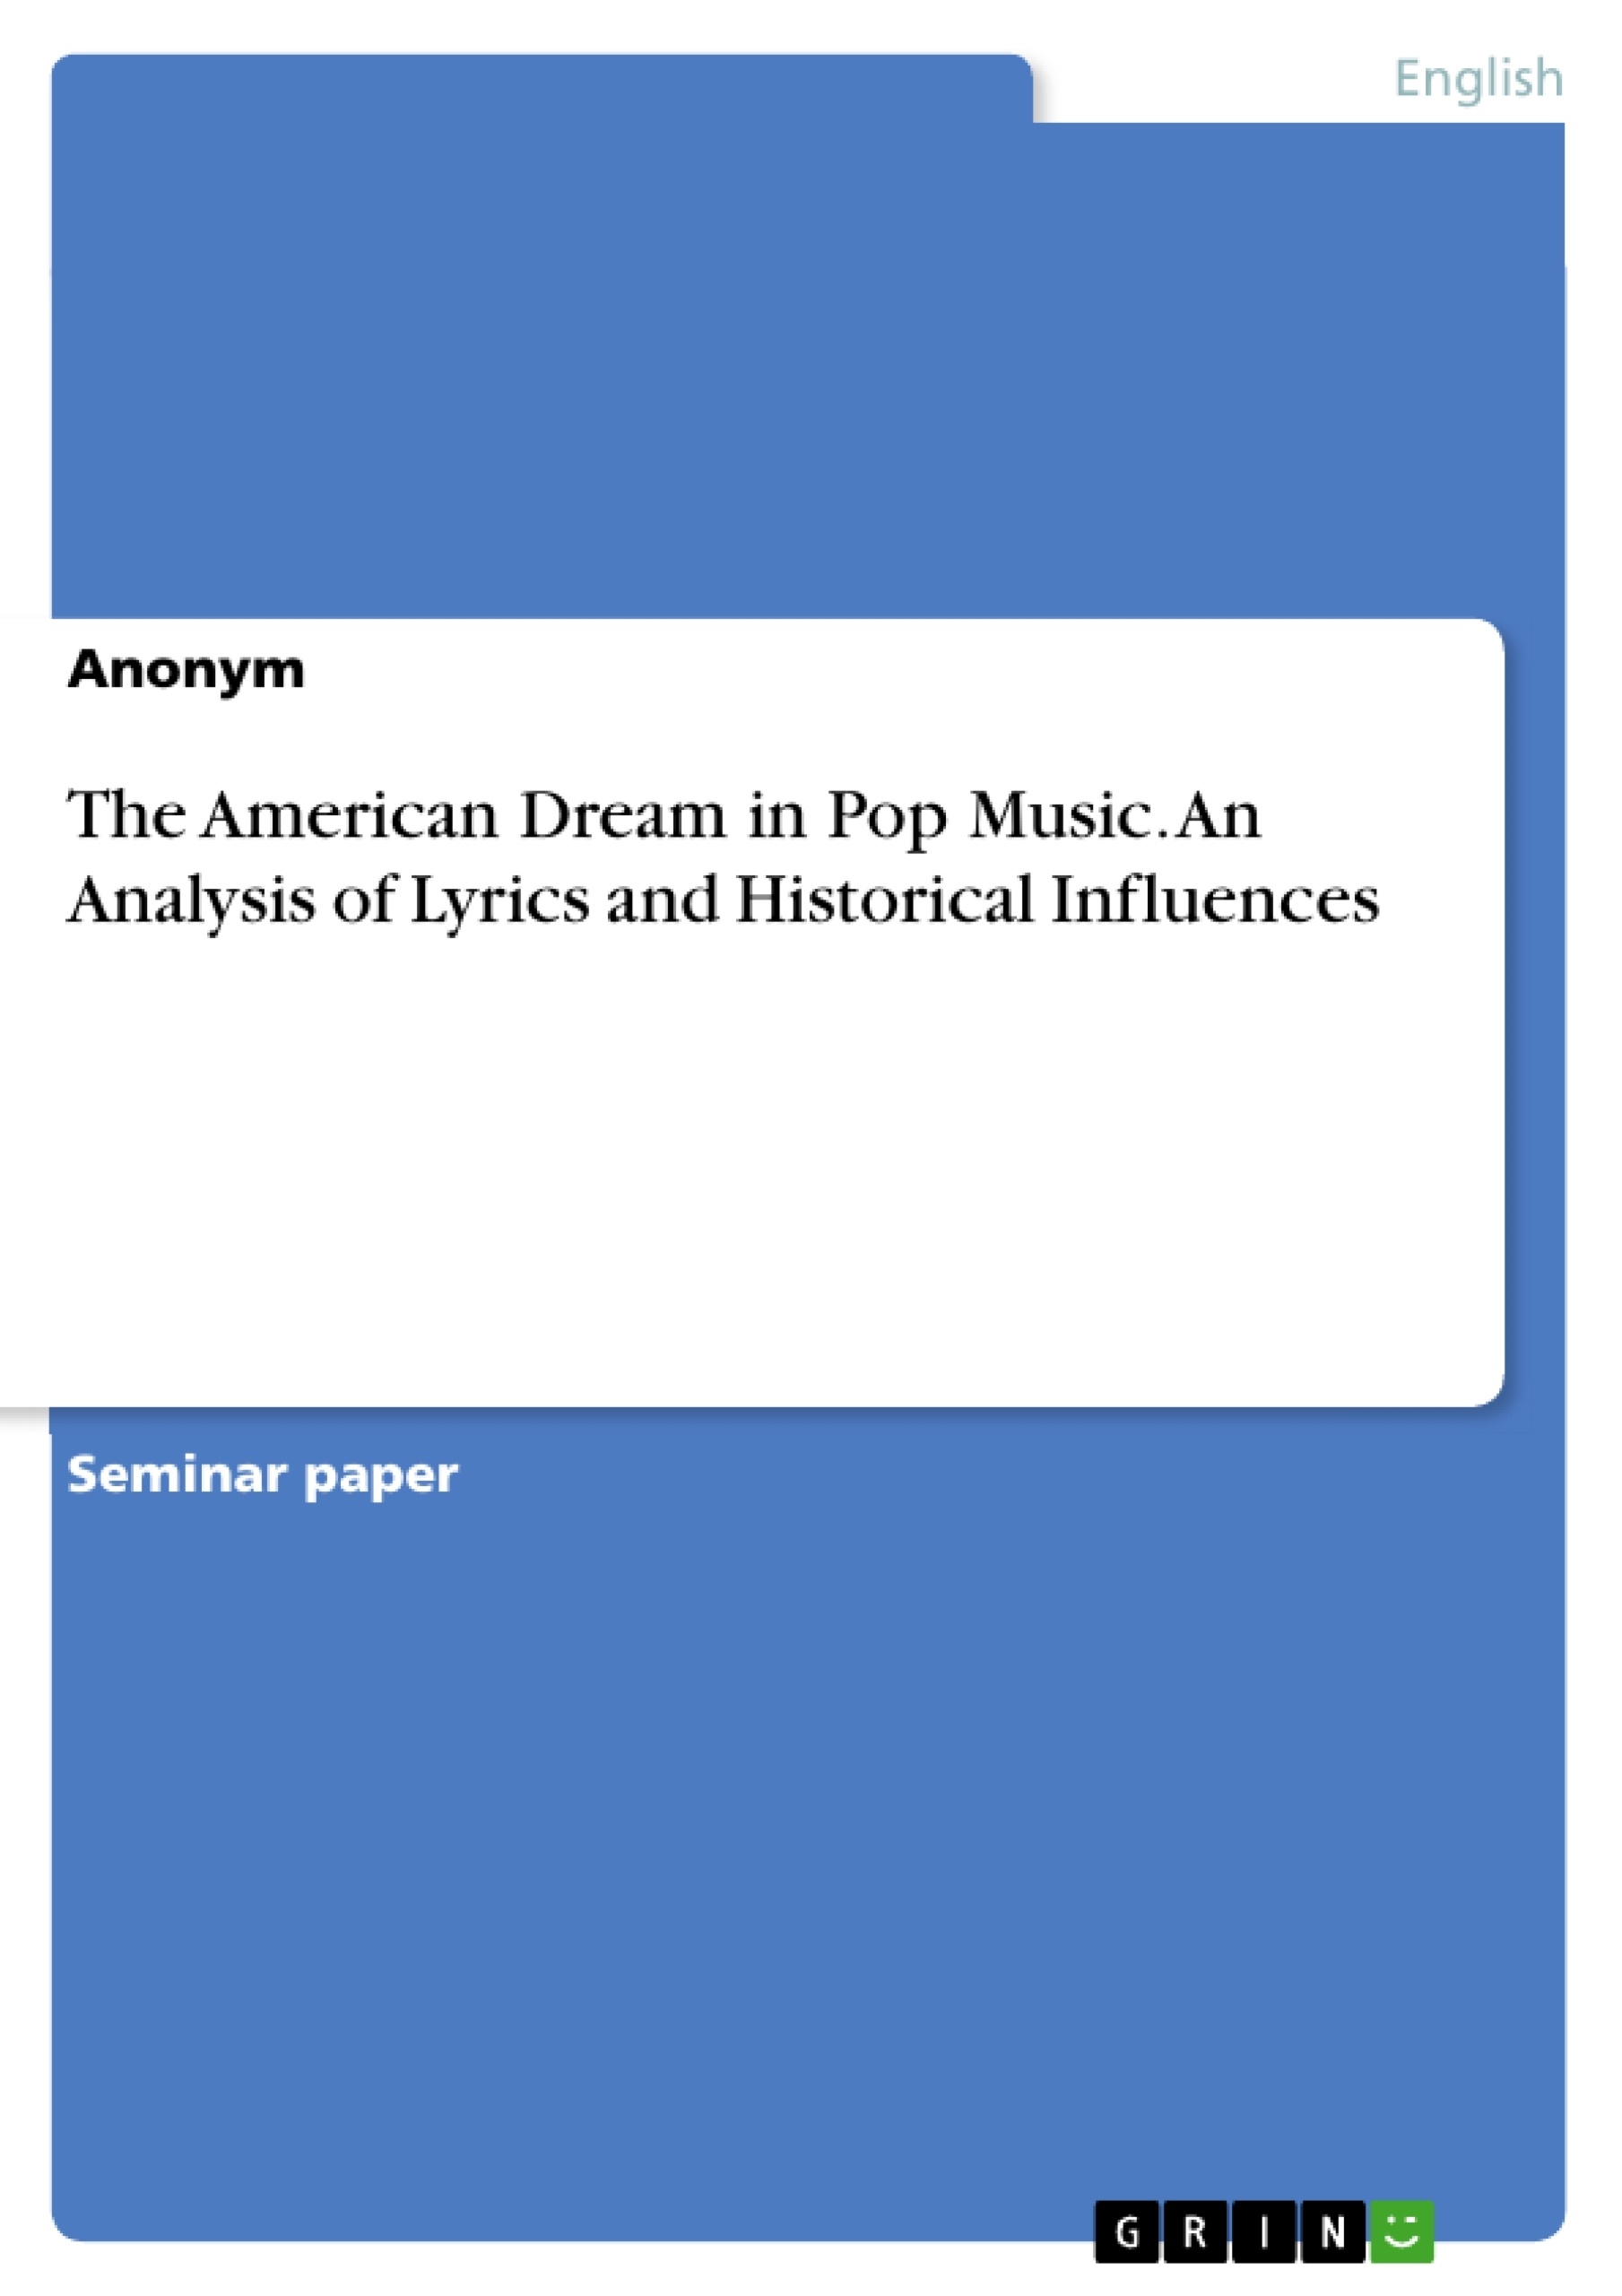 Title: The American Dream in Pop Music. An Analysis of Lyrics and Historical Influences